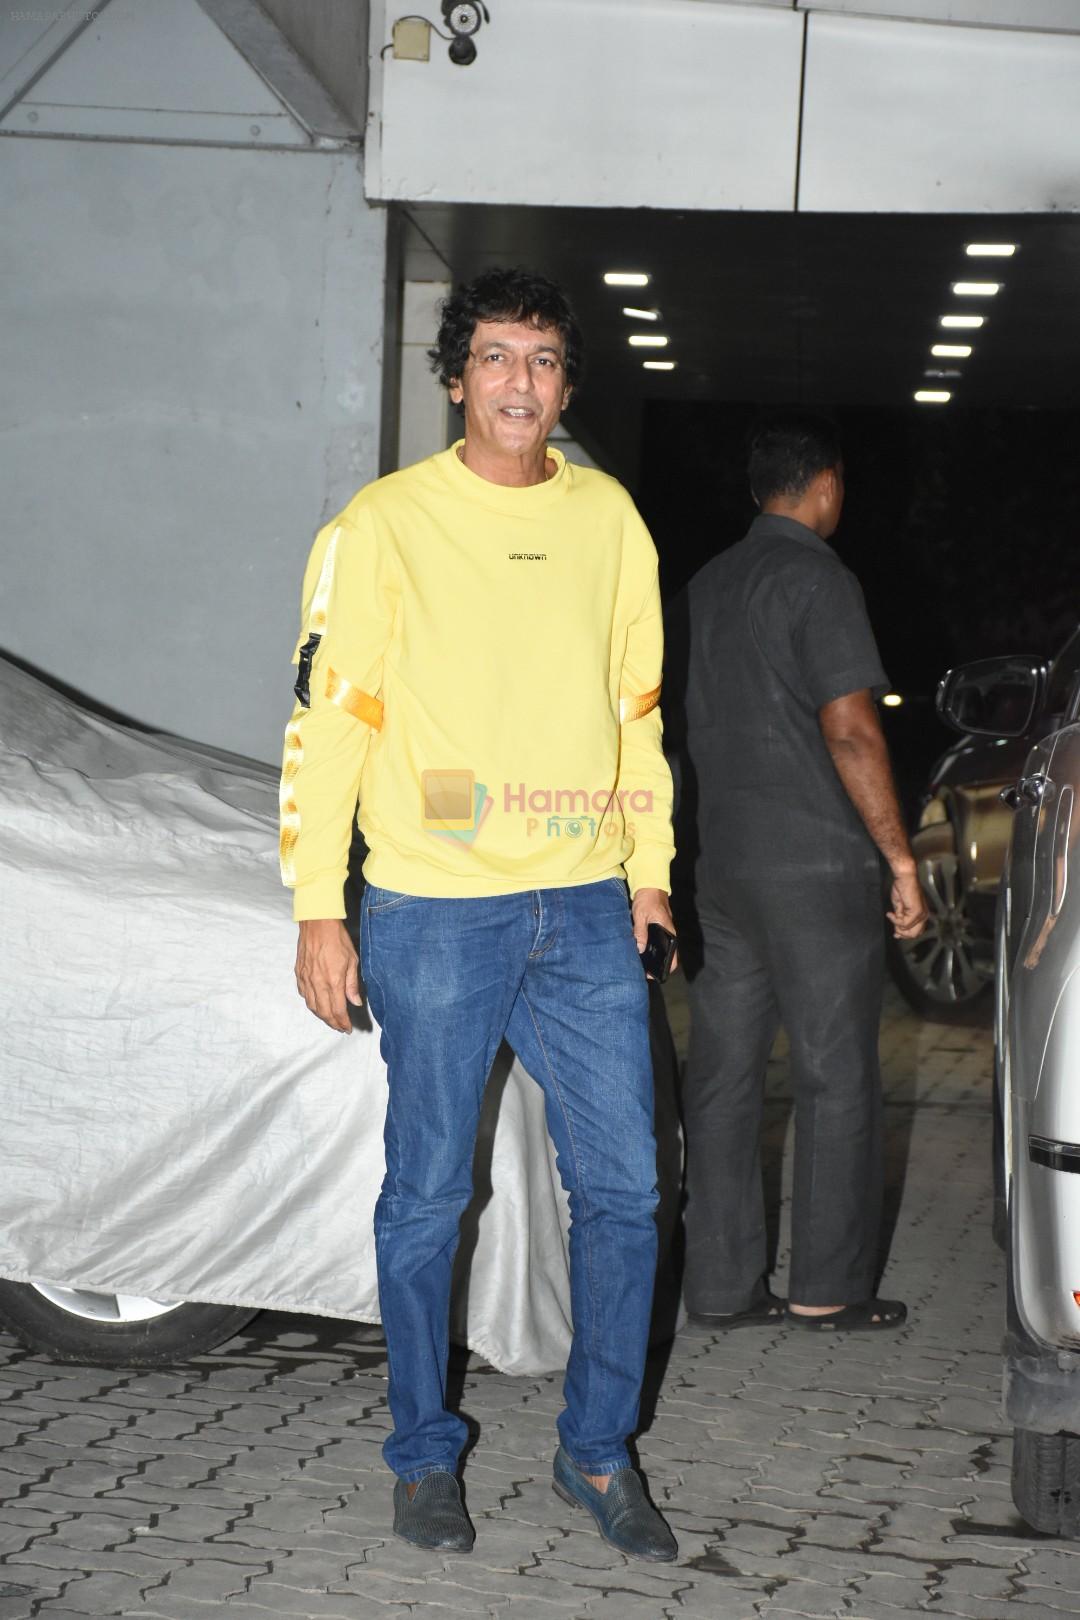 Chunky Pandey at Sohail Khan's house in bandra on 16th June 2019